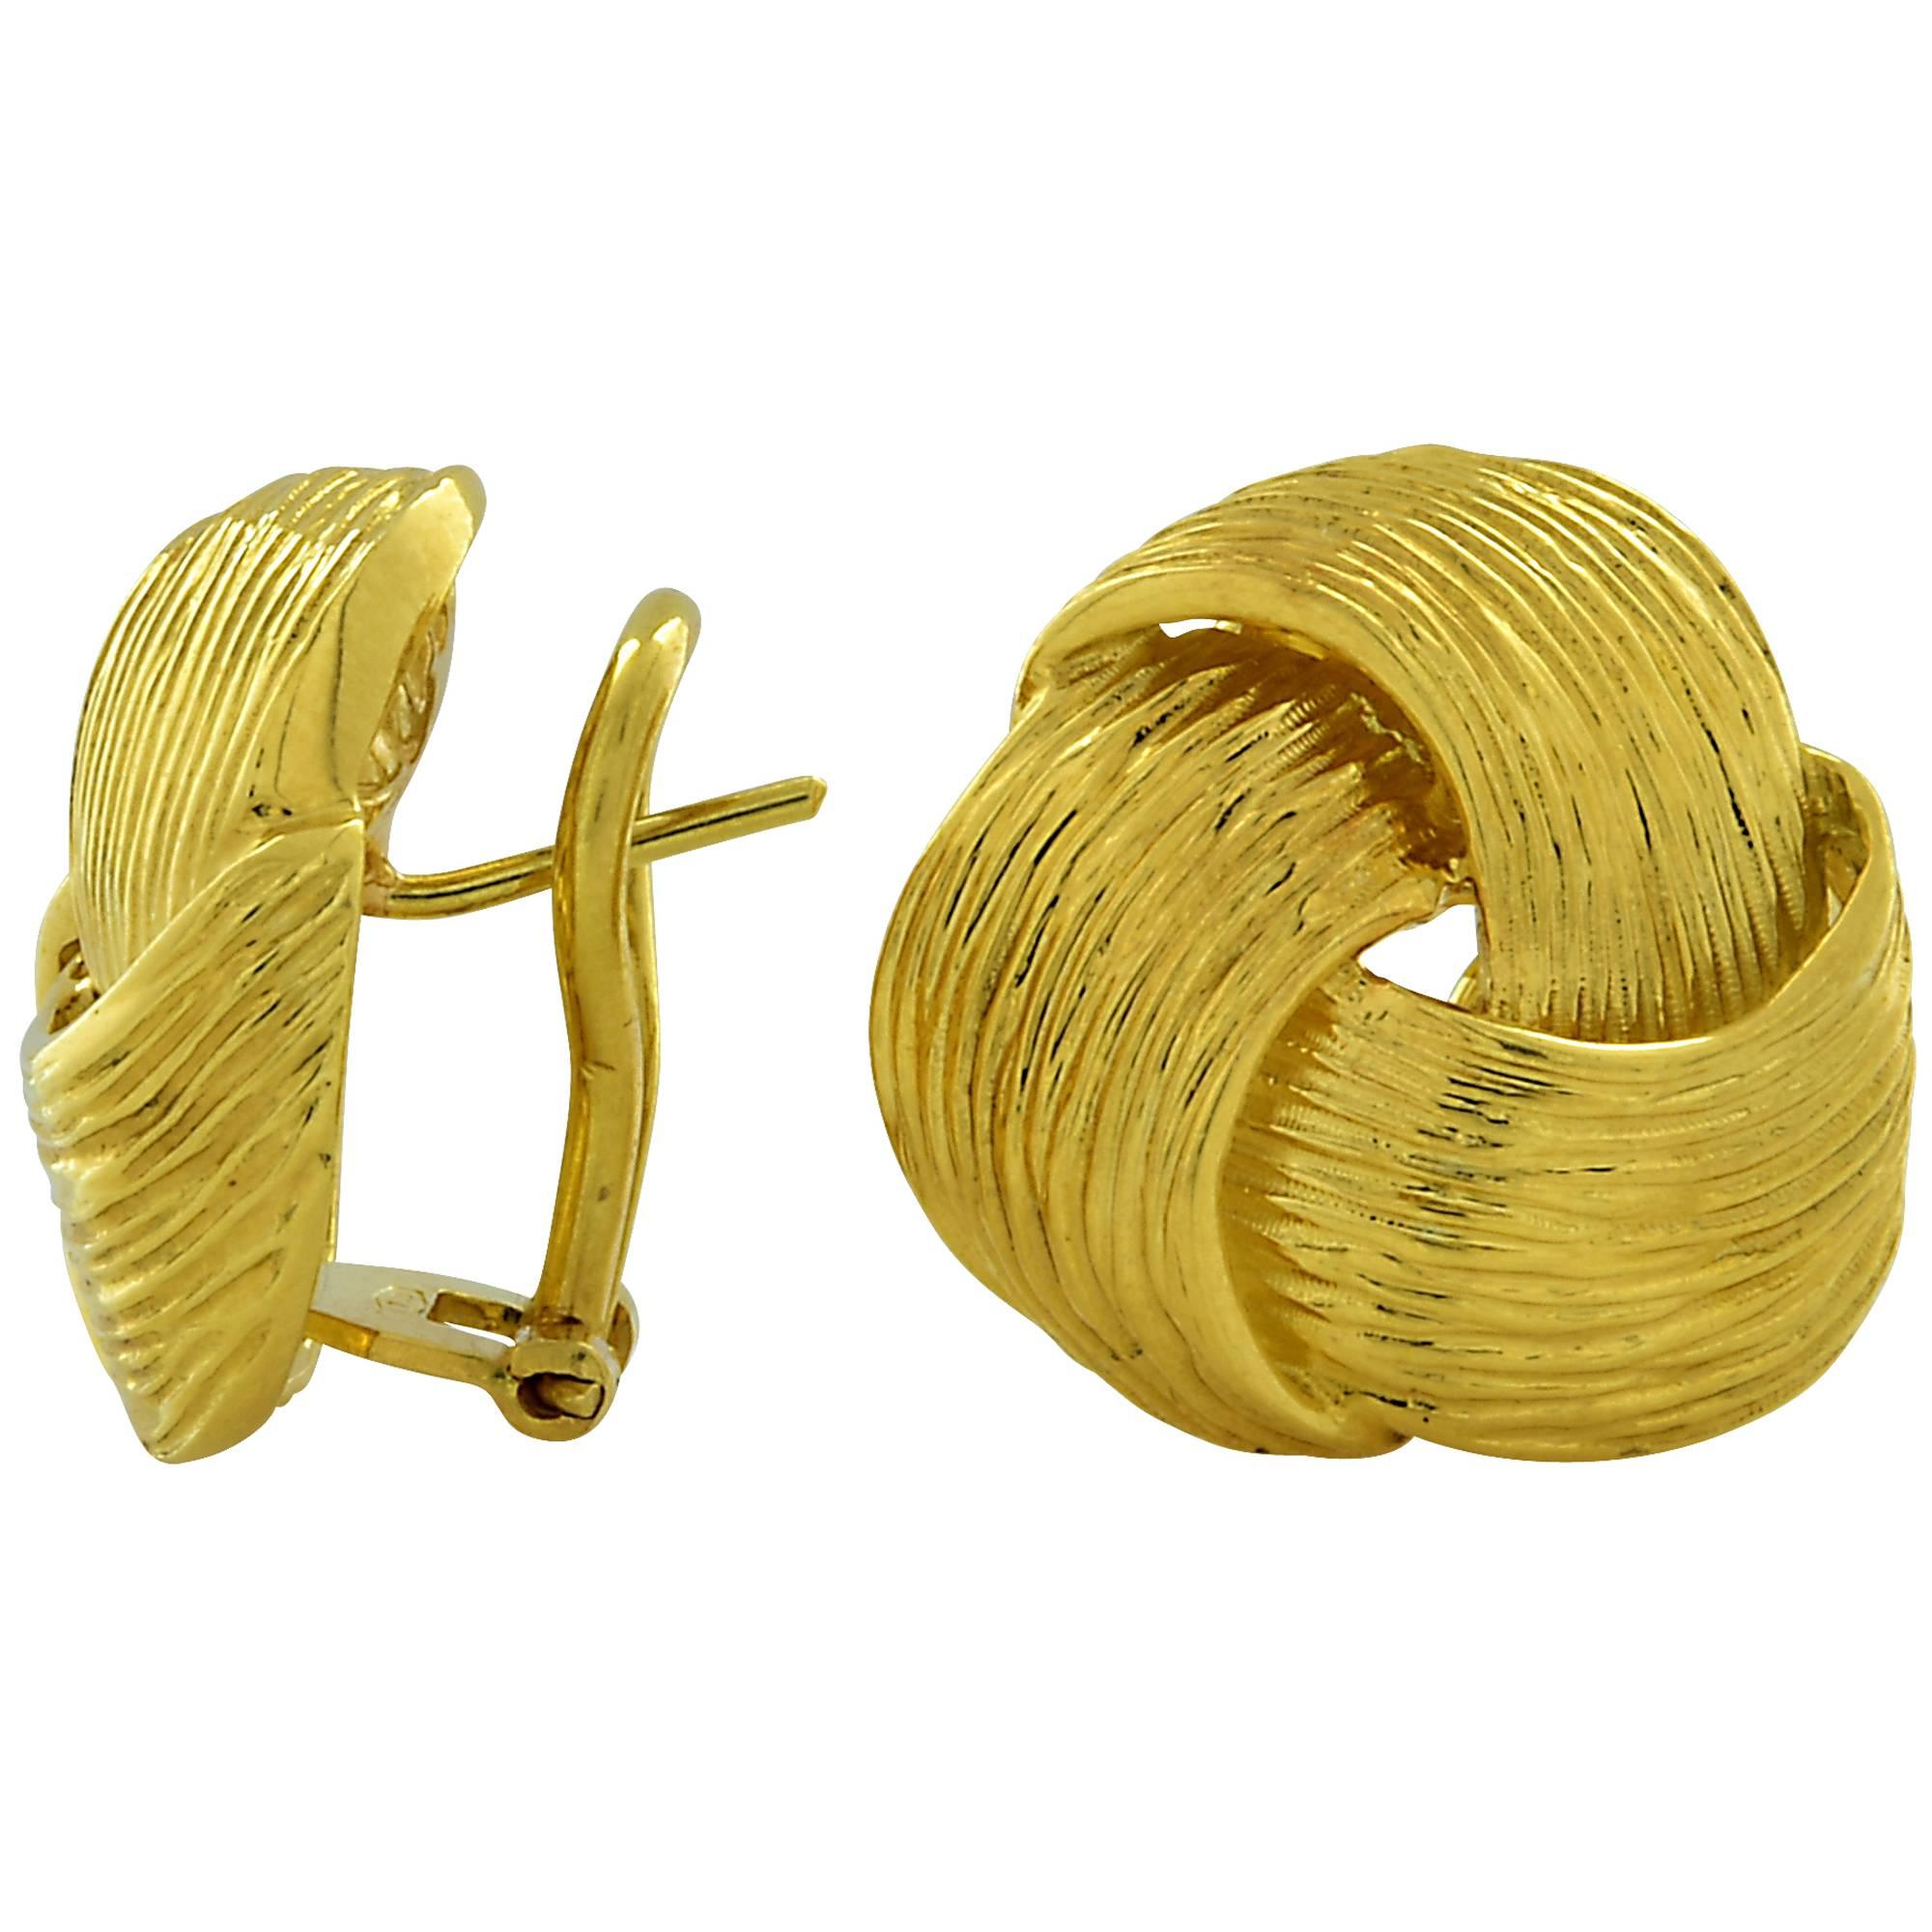 Beautiful 18k yellow gold earrings featuring a interwoven swirl design.

These earrings measure 20mm in diameter.
It is stamped and/or tested as 18k gold.
The metal weight is 13.20 grams.

These gold earrings are accompanied by a retail appraisal